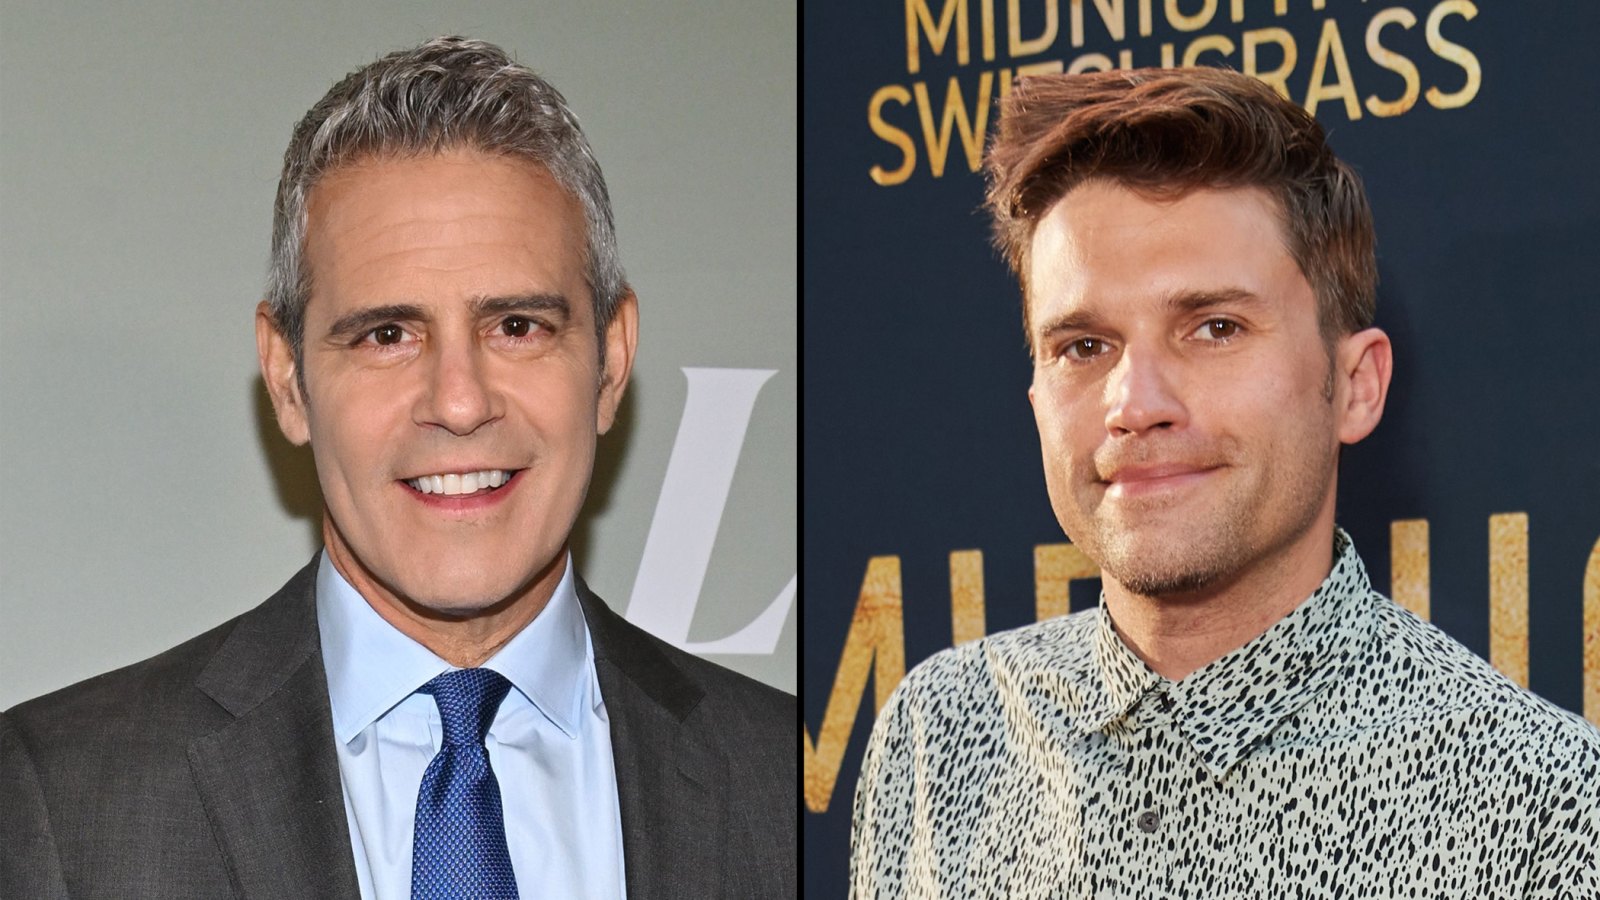 Andy Cohen Reveals What Advice He Gave to Vanderpump Rules’ Tom Schwartz Following His ‘WWHL’ Interview